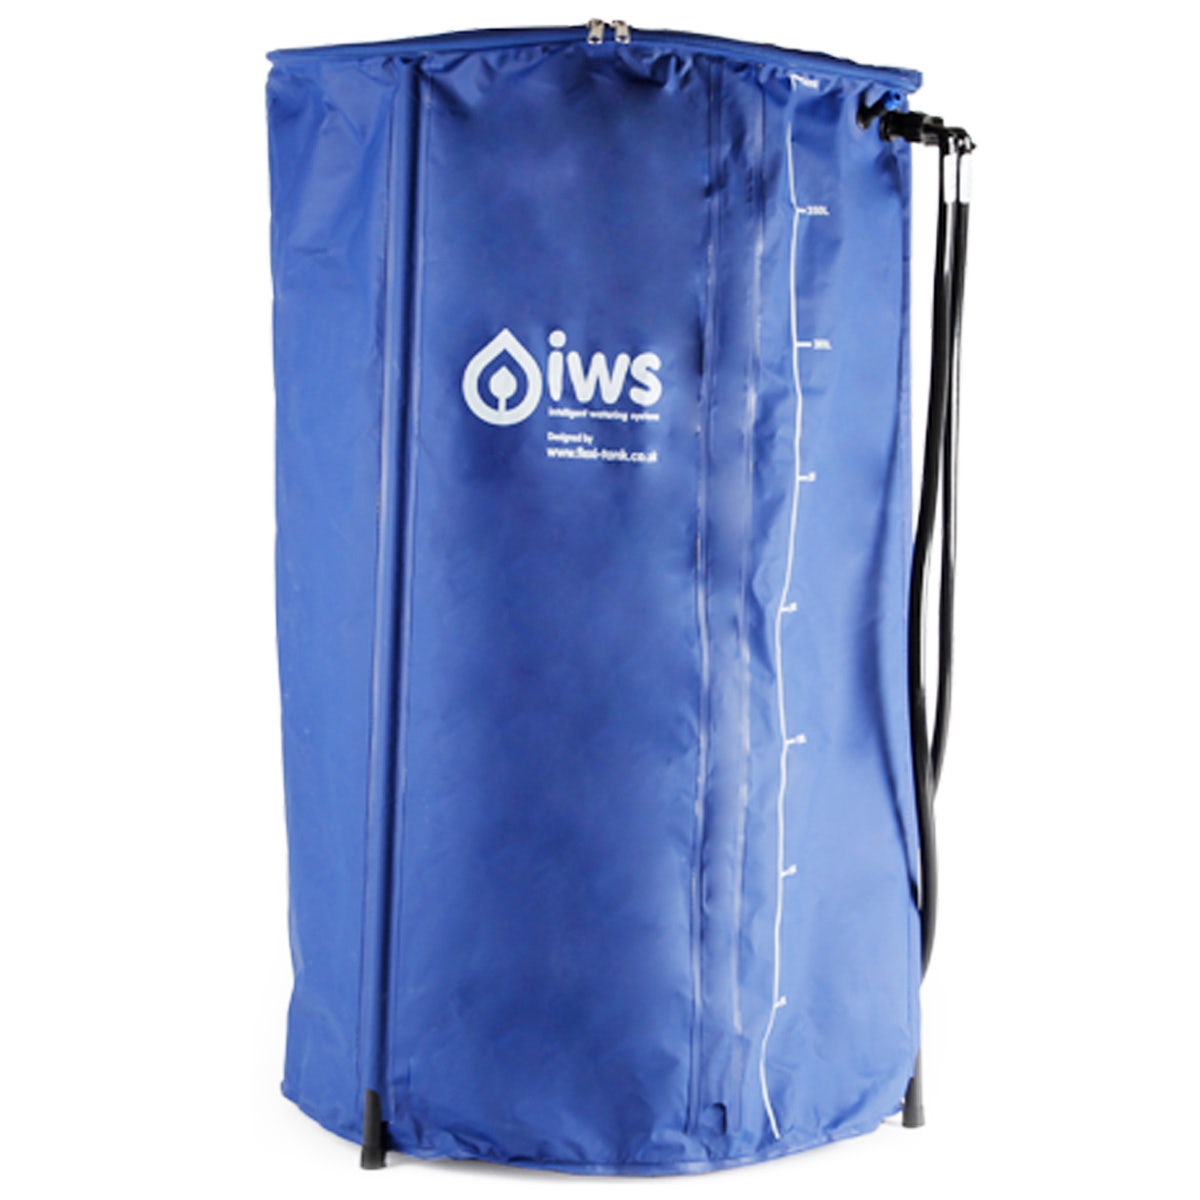 IWS Pro FlexiTank with Pipes & Pump